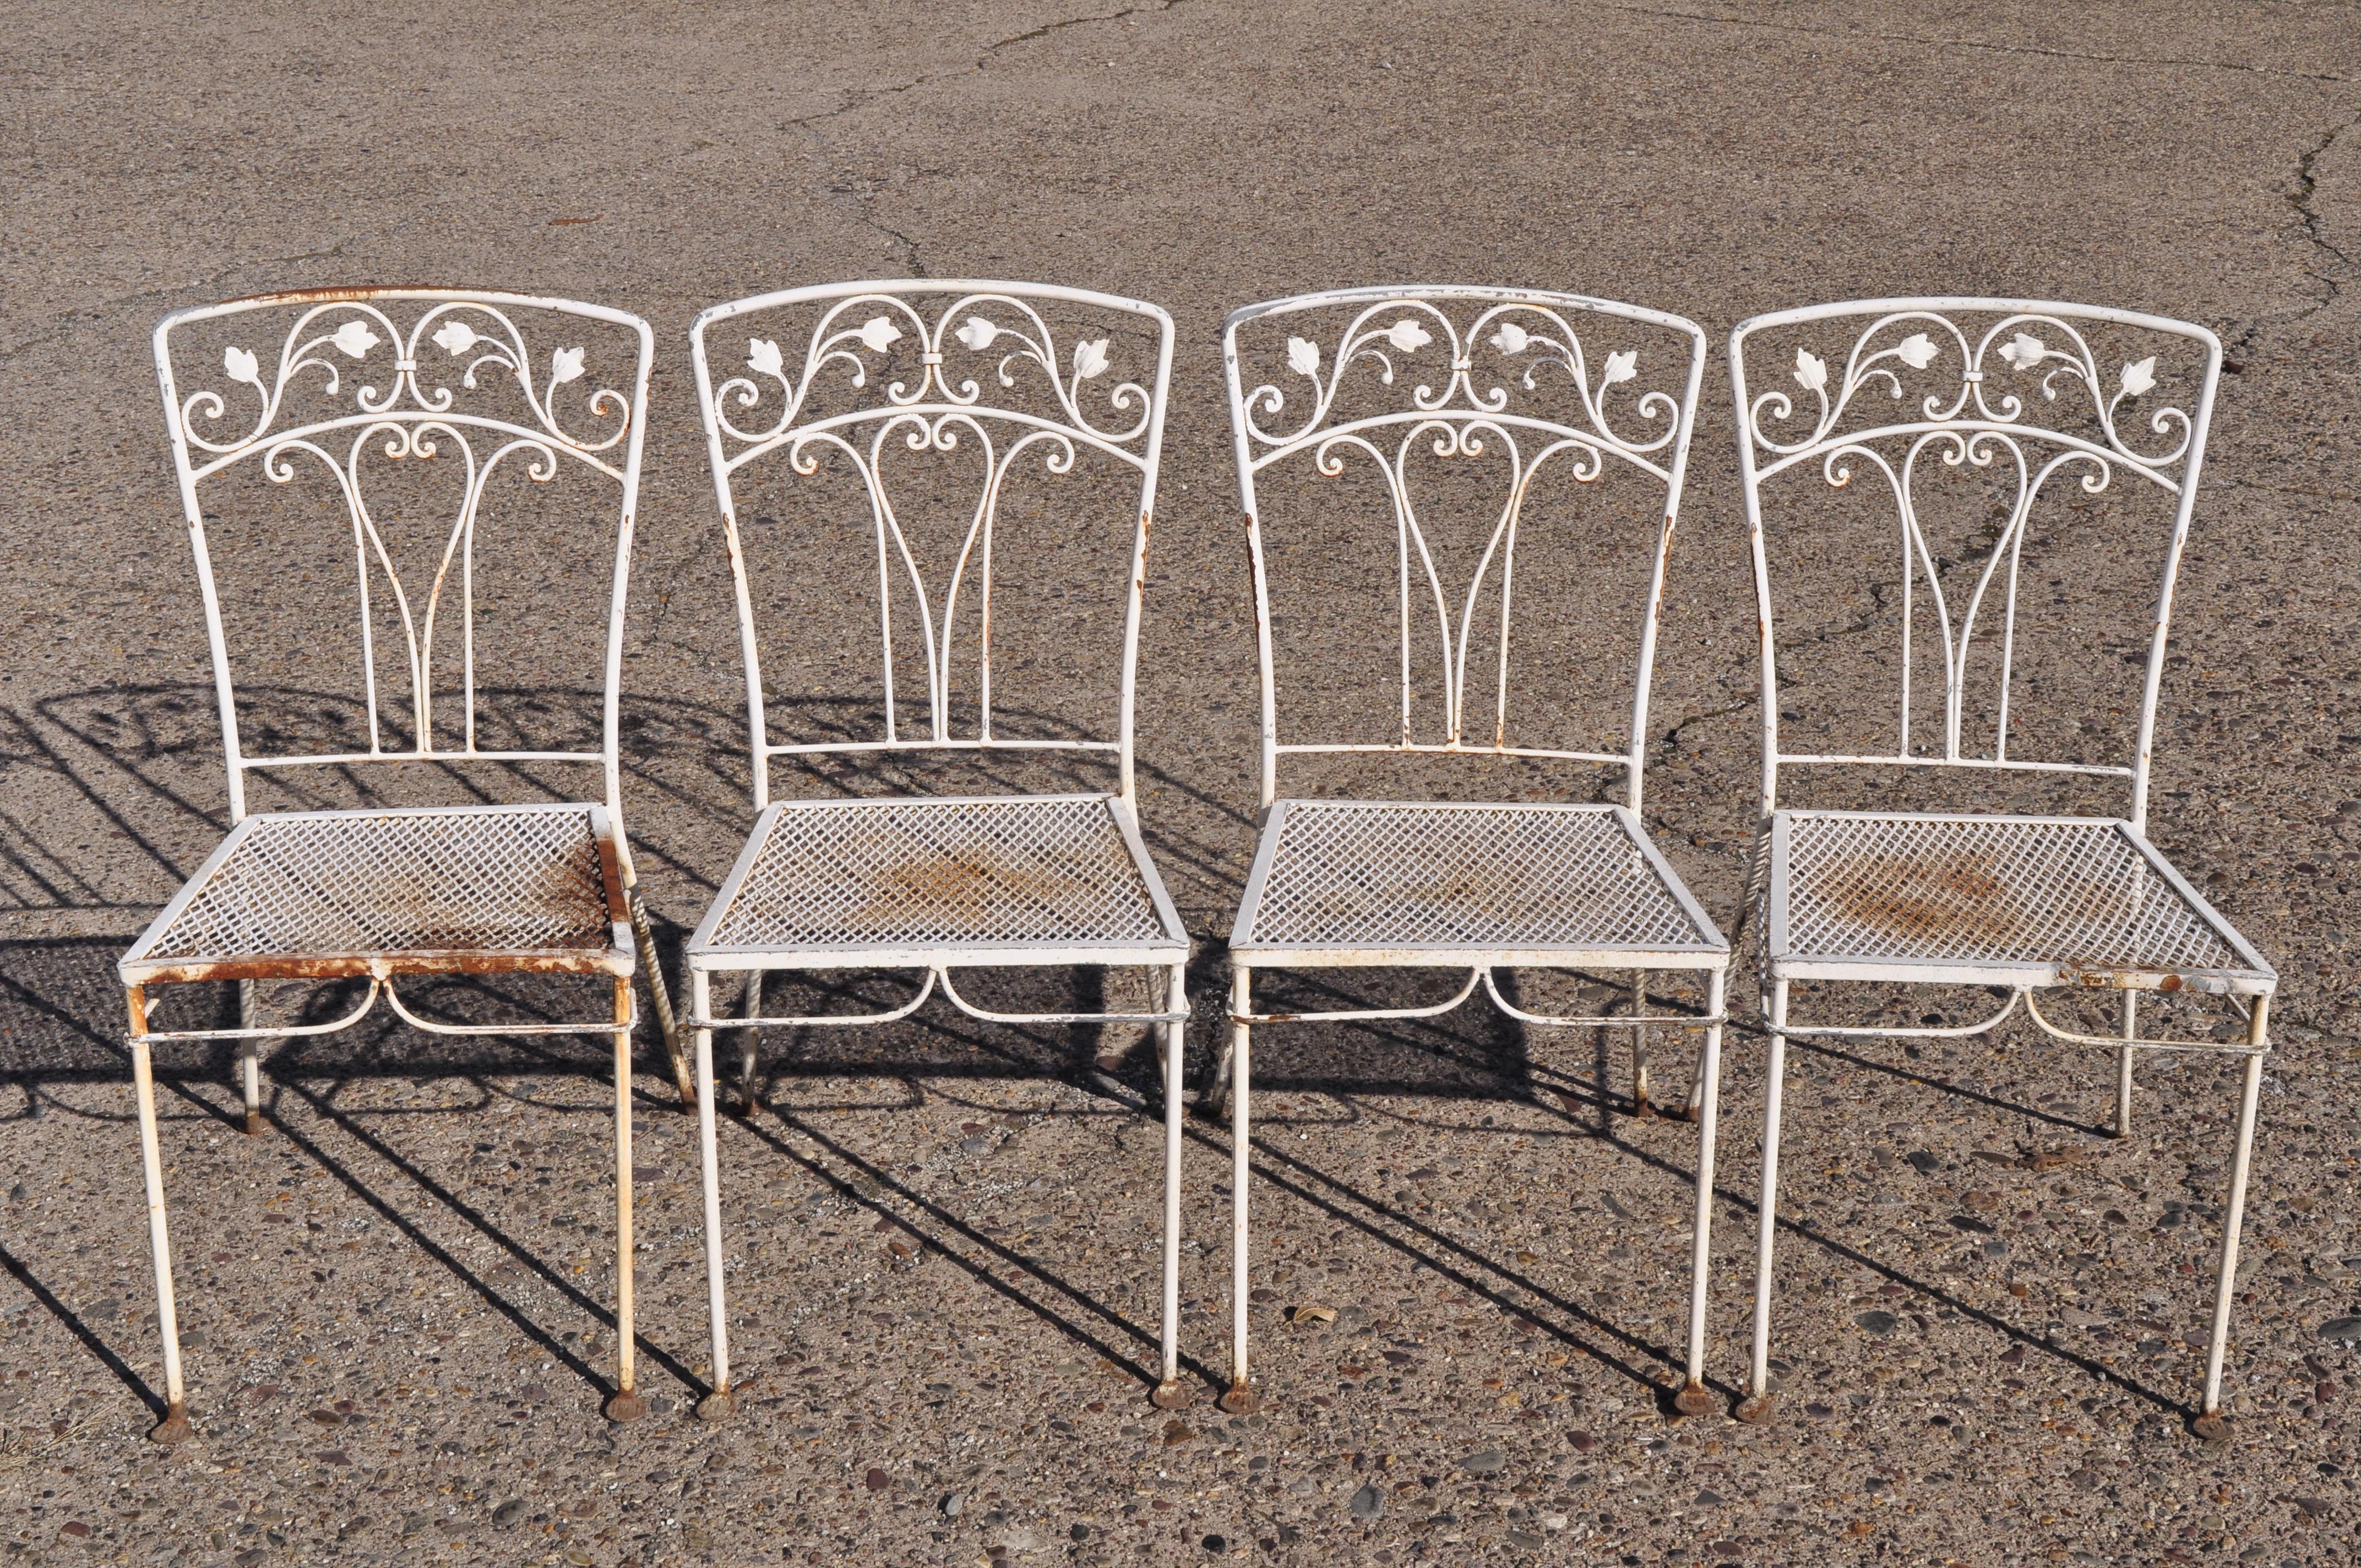 Vintage John Salterini 5-piece leaf and vine wrought iron garden patio dining set. Listing includes (4) dining side chairs, rectangular dining table (no glass), metal mesh seats, rectangle patio table, wrought iron construction, circa mid-20th